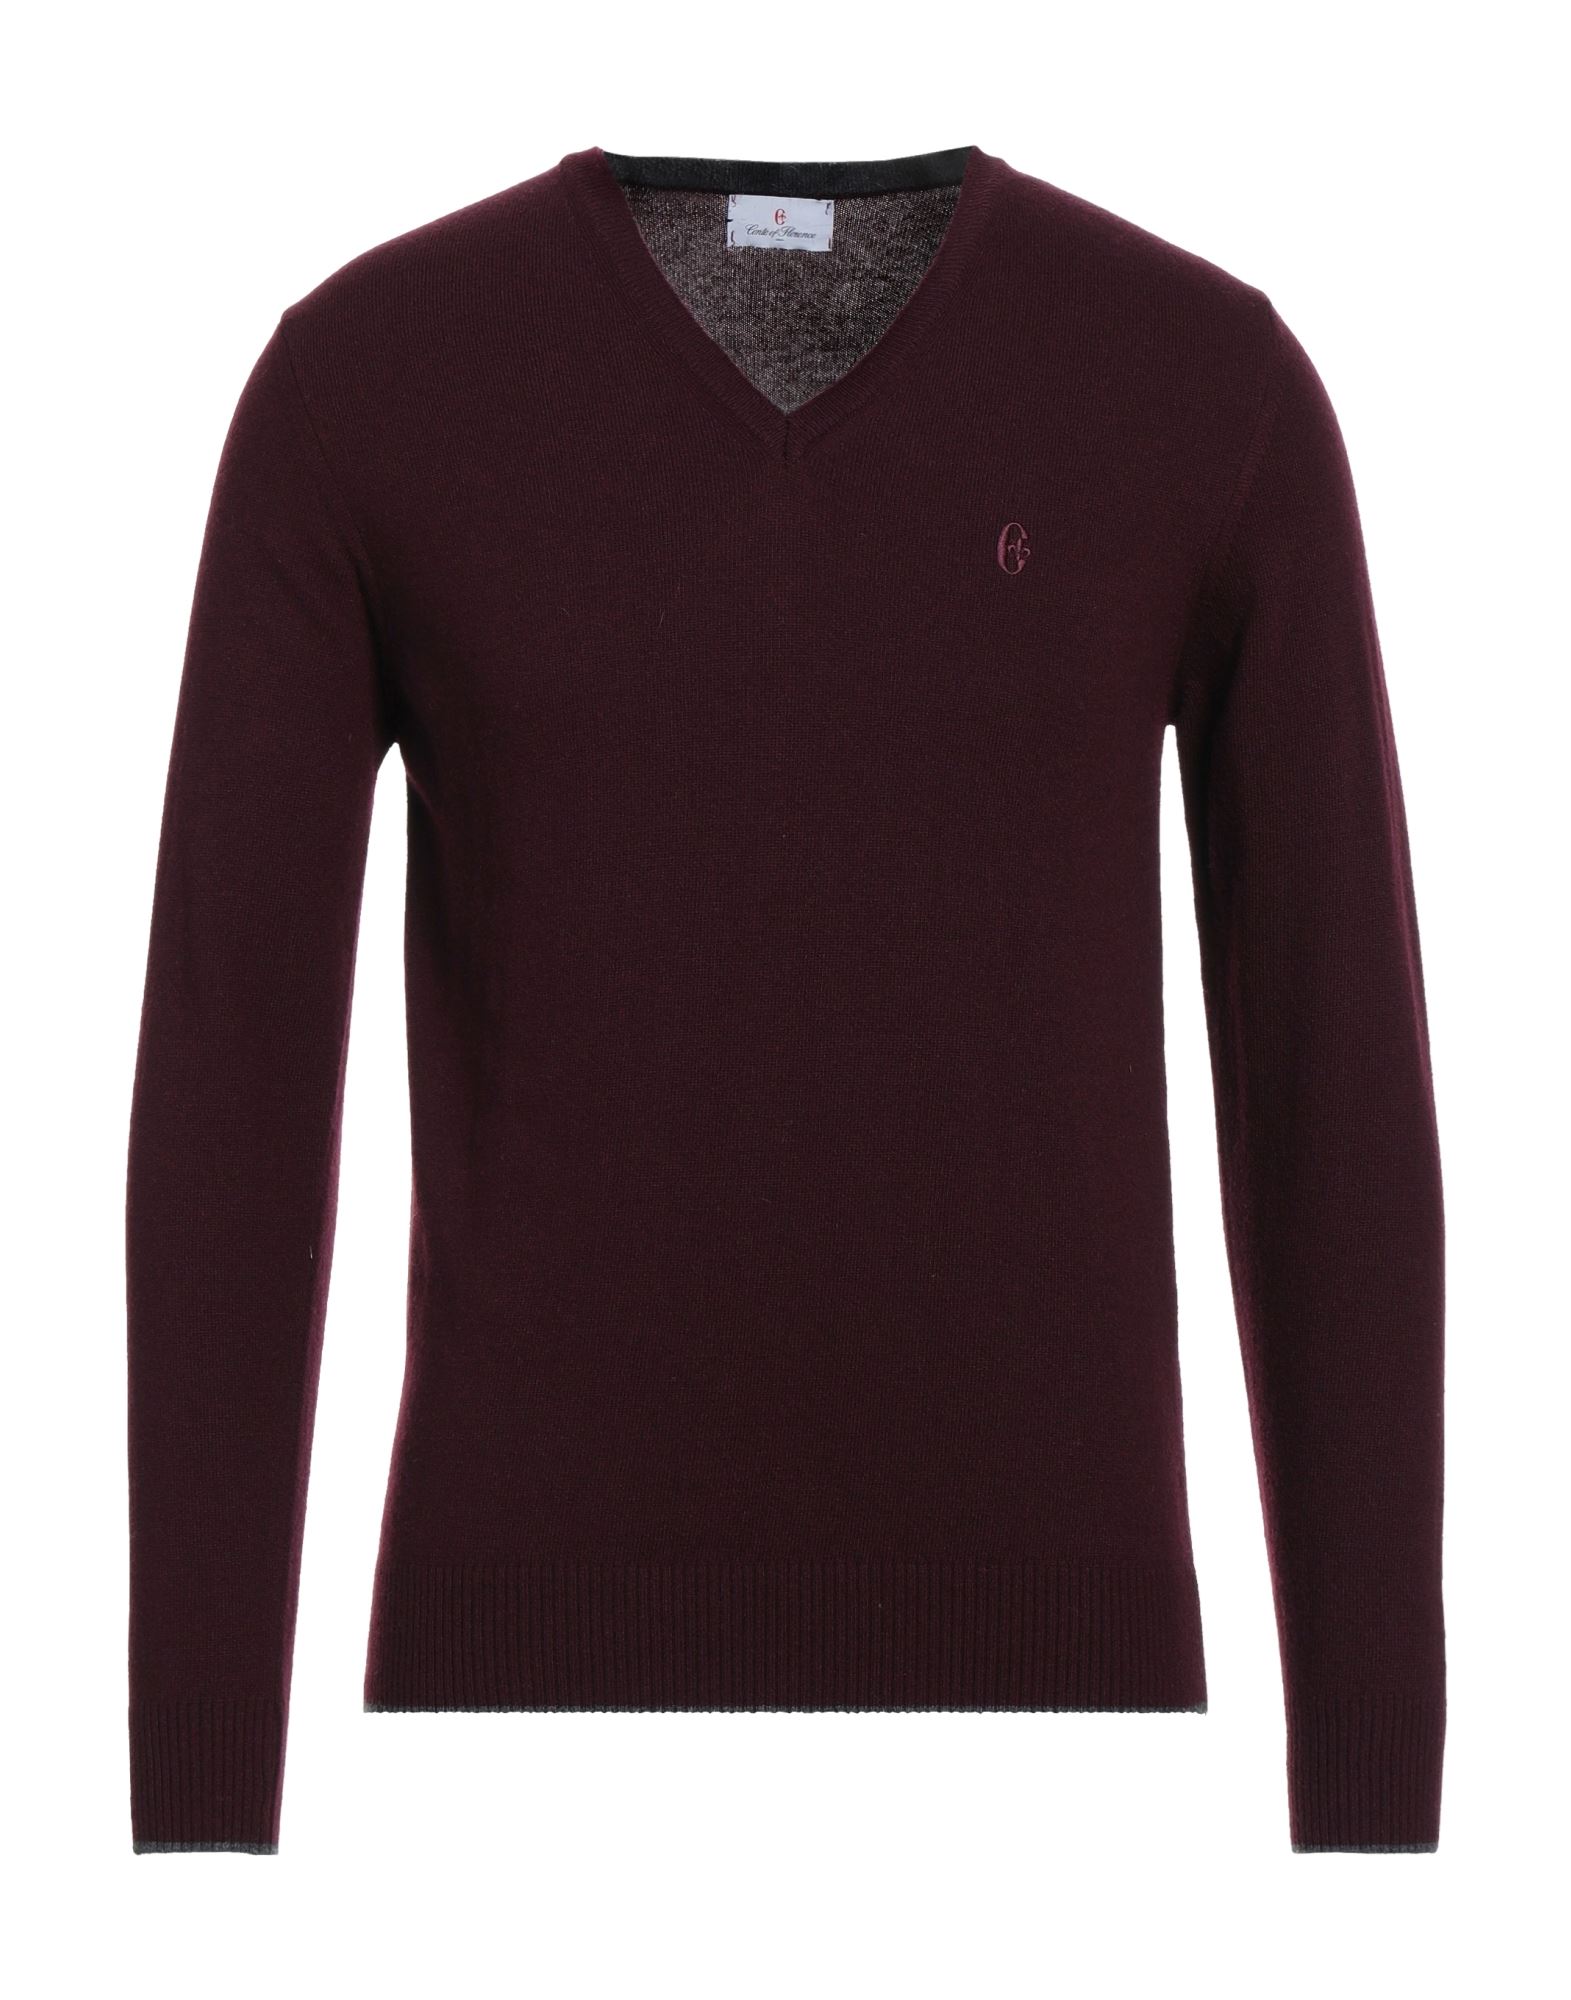 CONTE OF FLORENCE CONTE OF FLORENCE MAN SWEATER DEEP PURPLE SIZE S POLYAMIDE, WOOL, LYOCELL